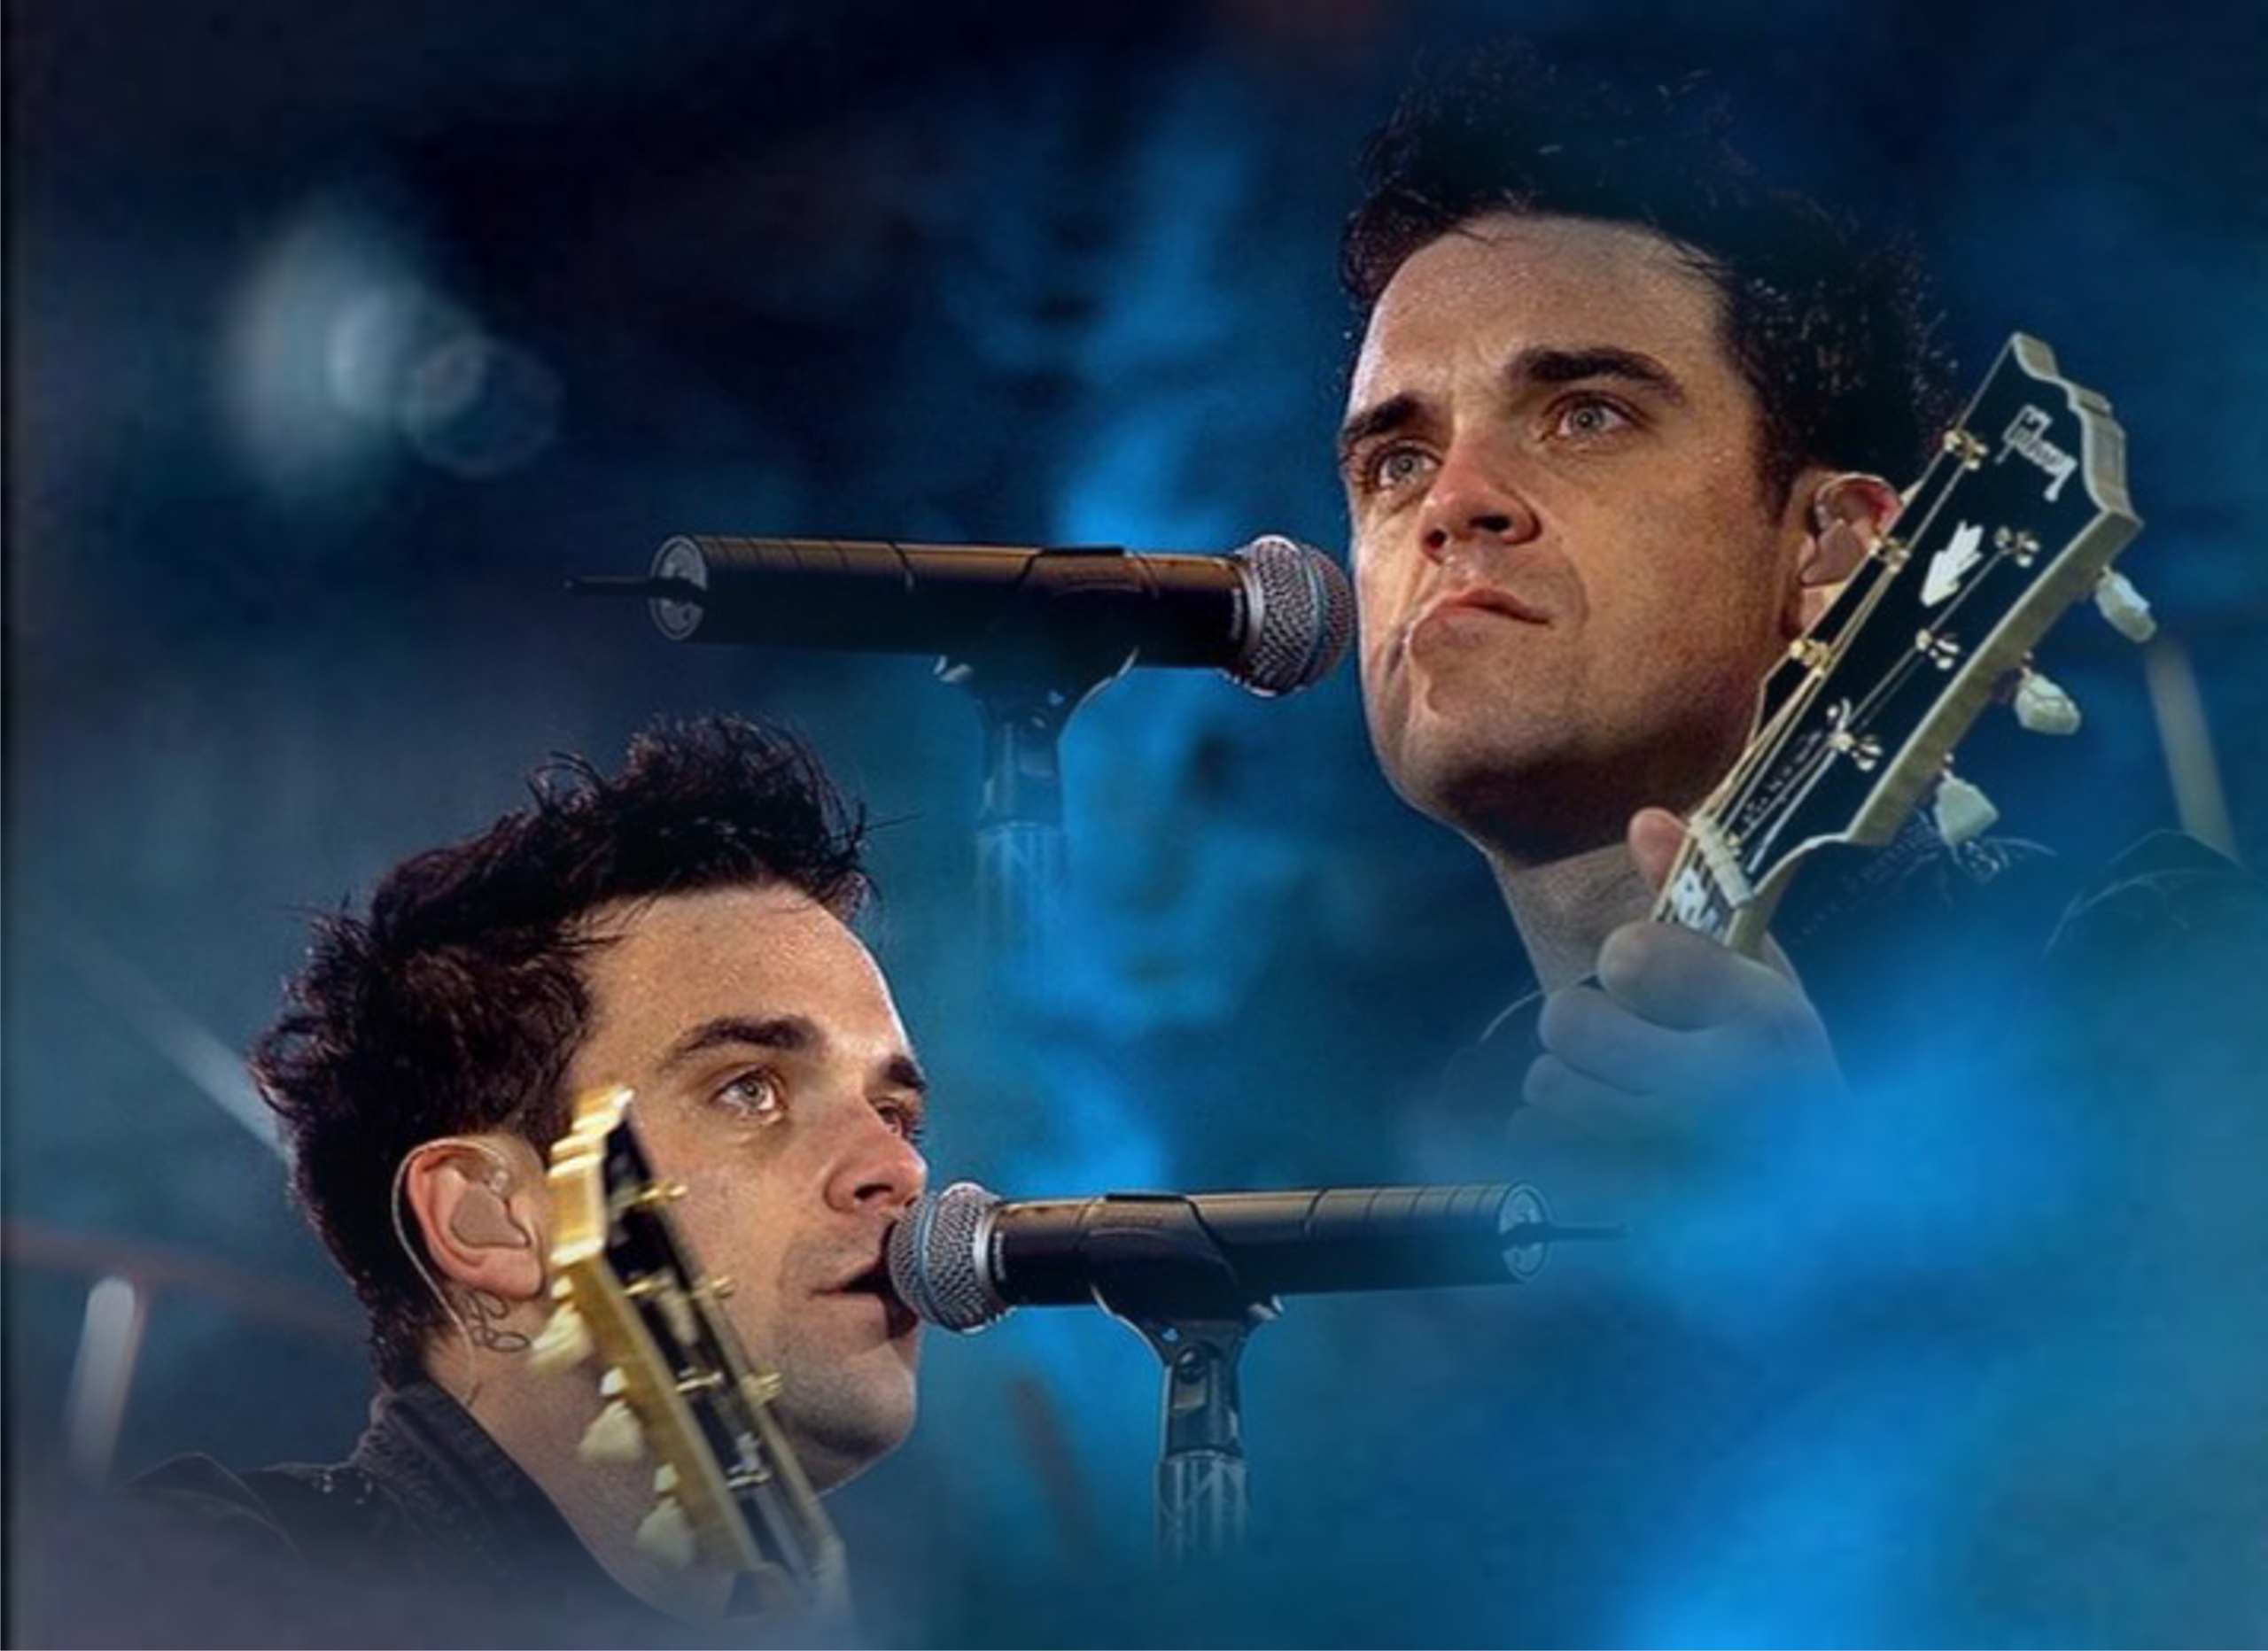 Robbie Williams image robbie williams HD wallpaper and background